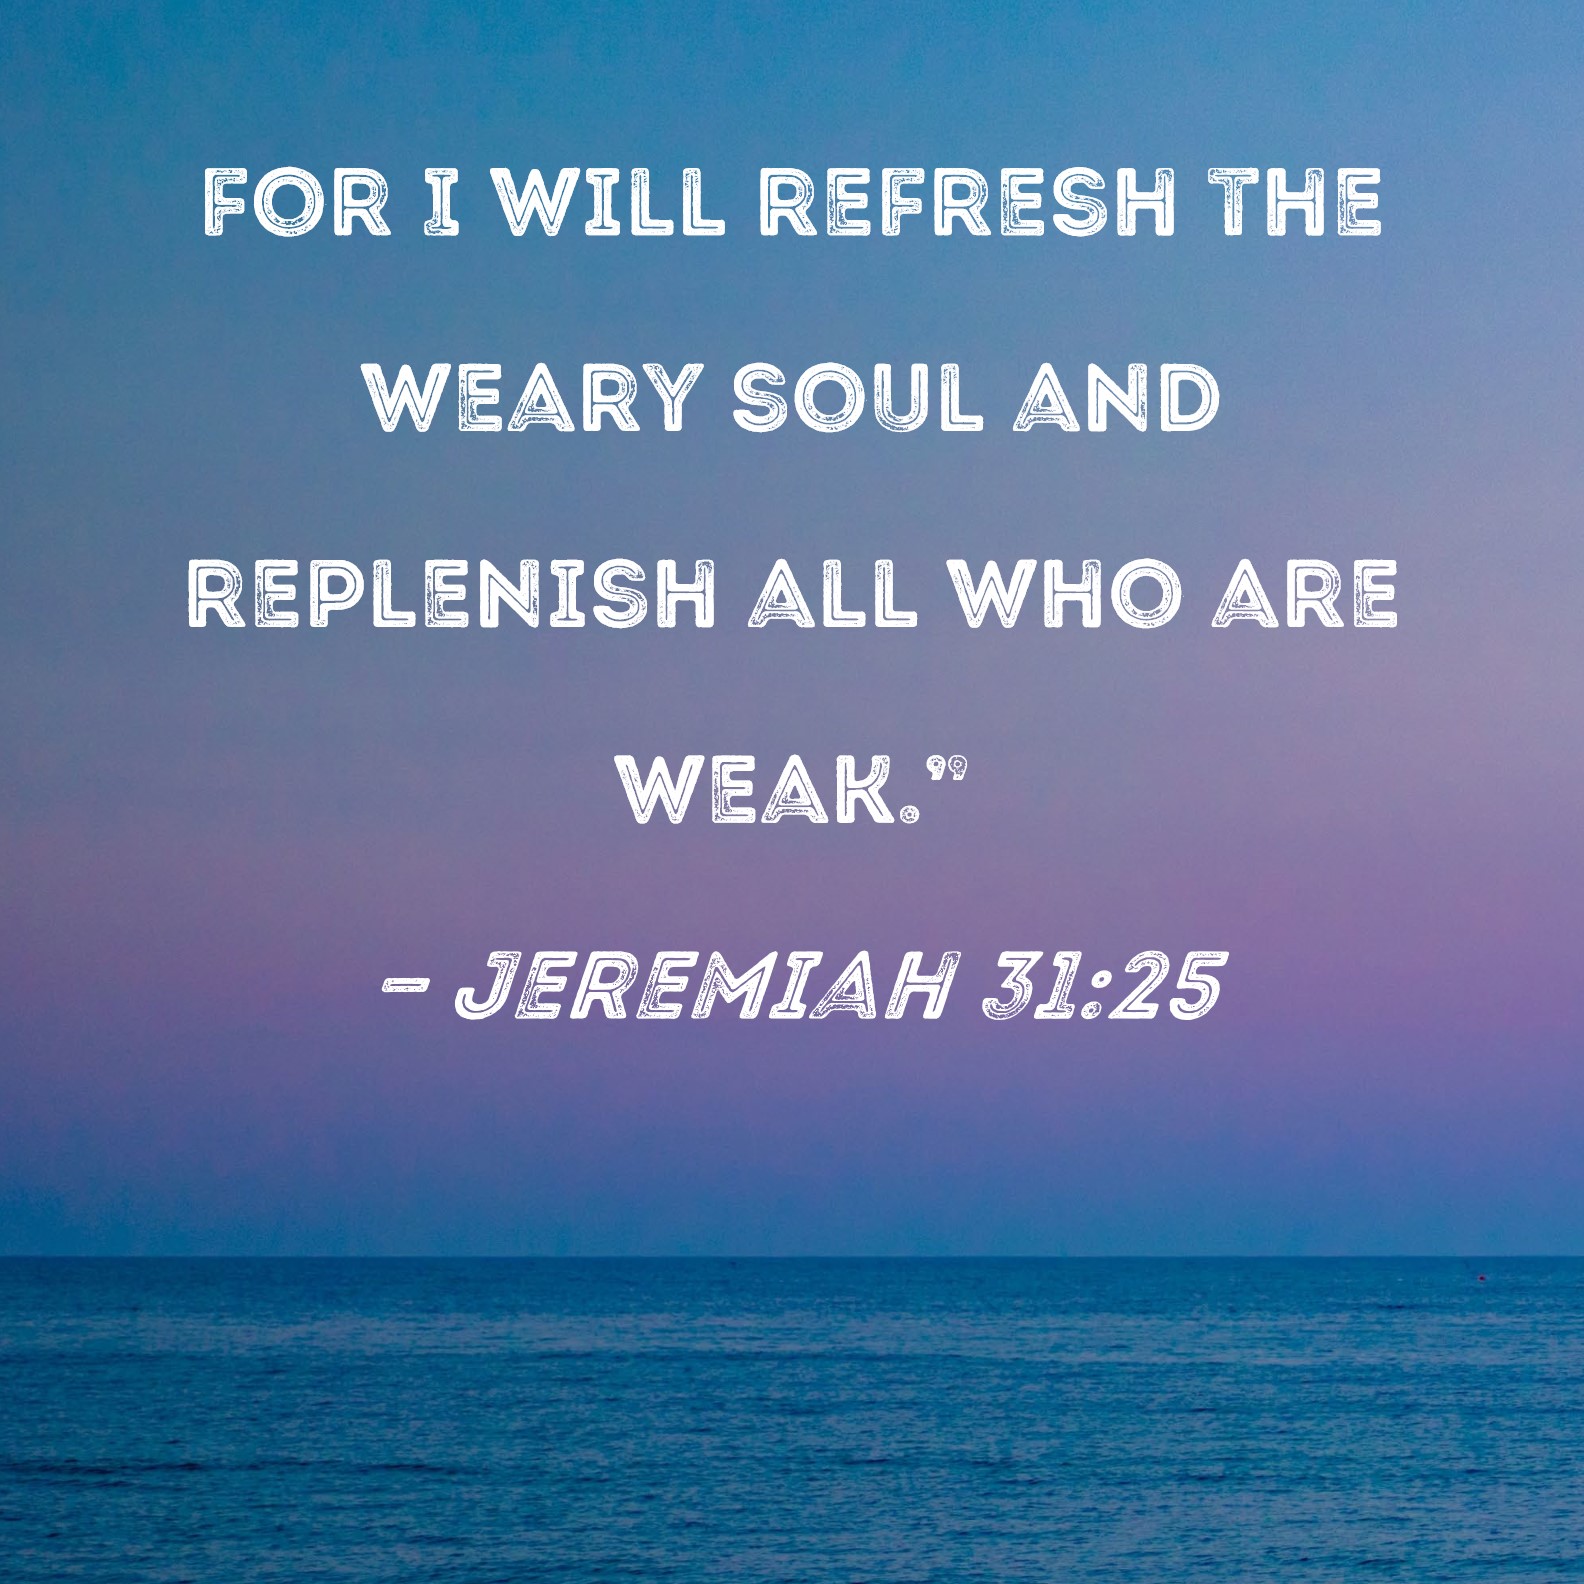 jeremiah-31-25-for-i-will-refresh-the-weary-soul-and-replenish-all-who